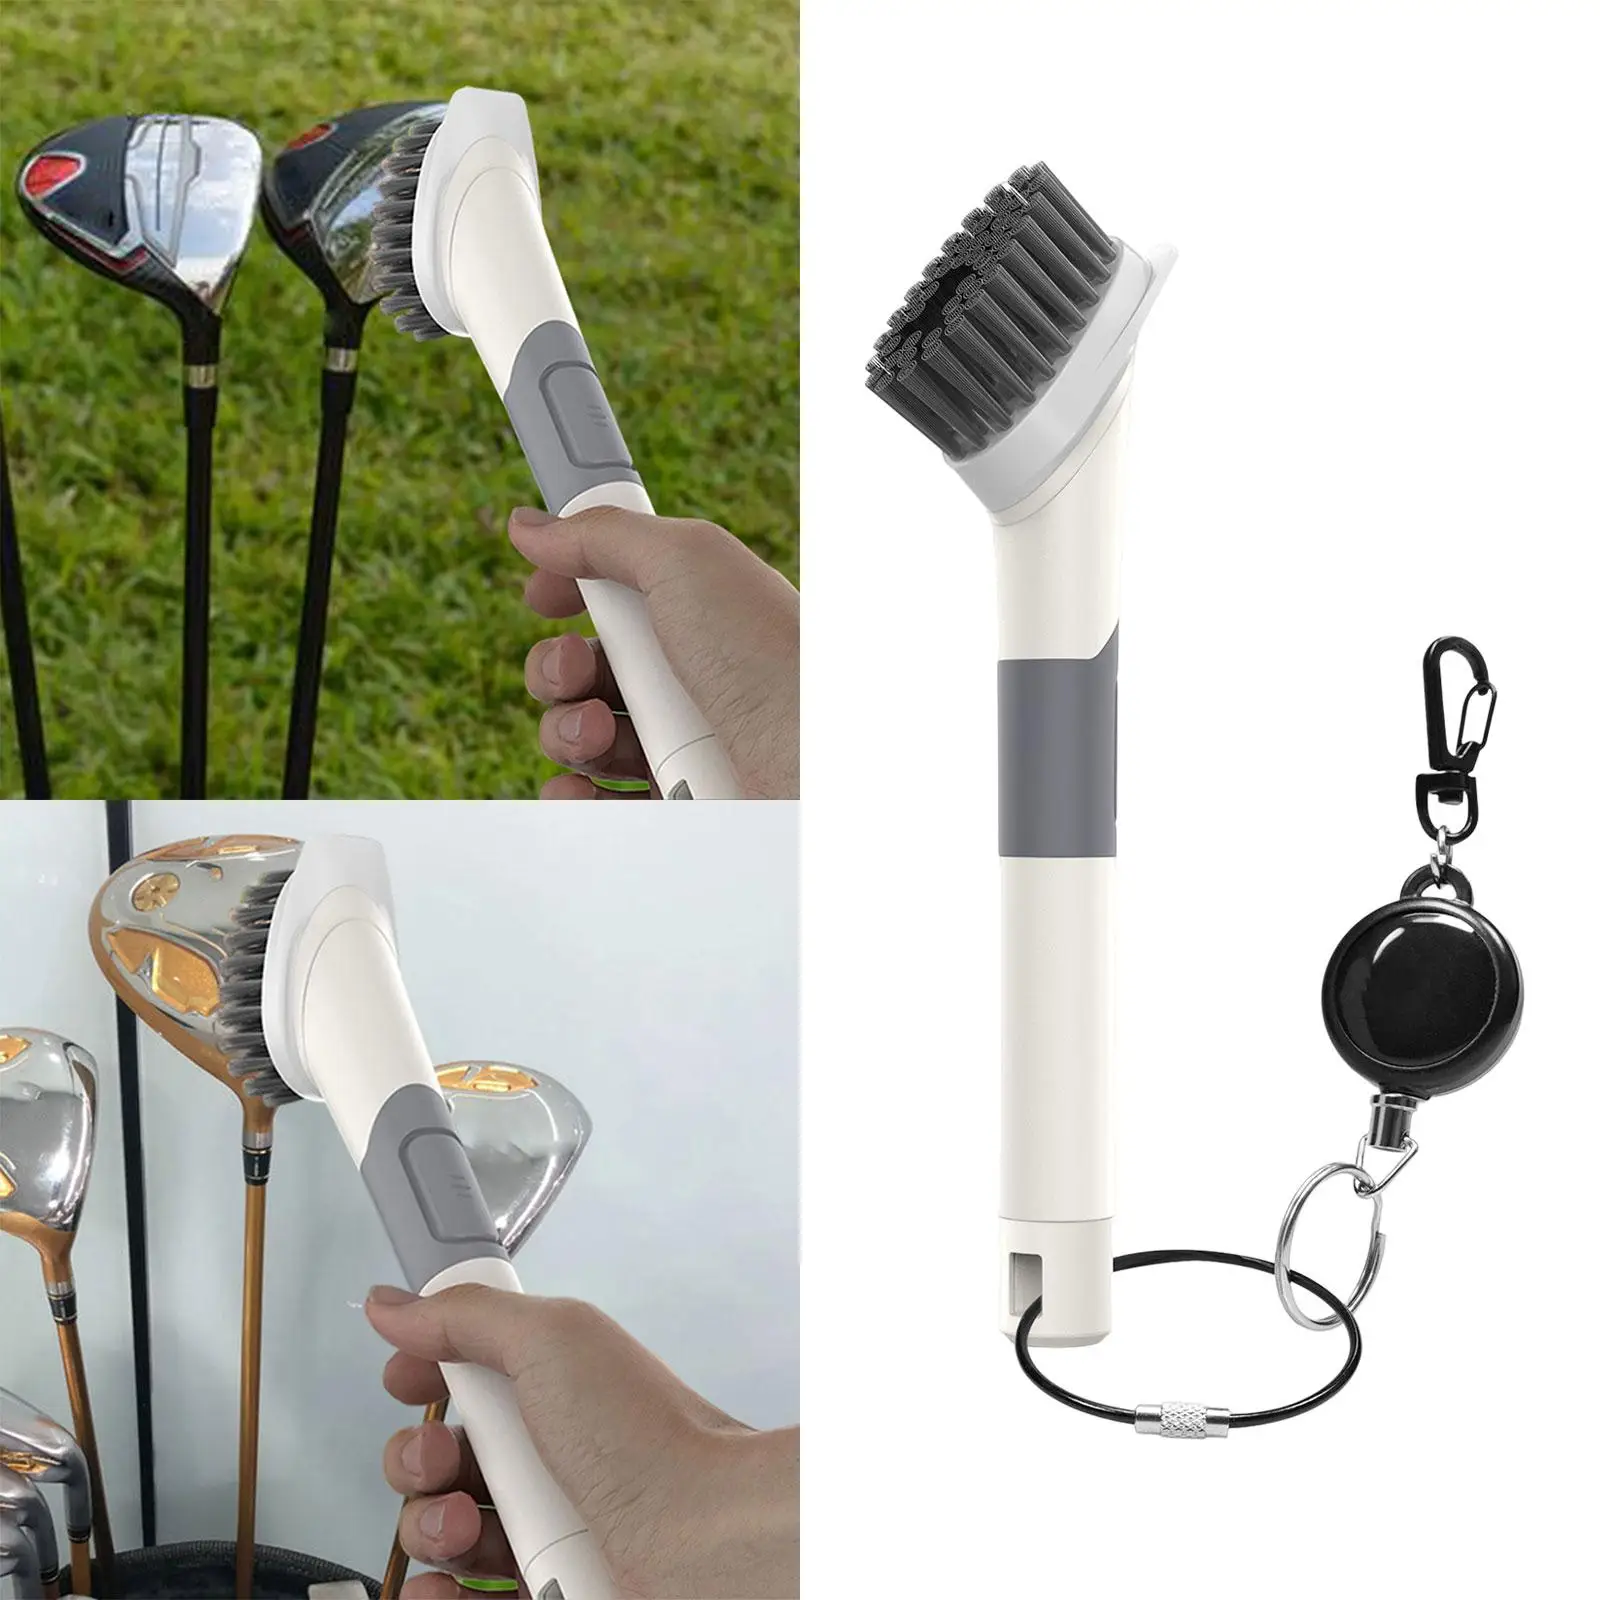 Golf Club Cleaner Cleaning brushes easy Cleaning Accessories Golf Club Groove Cleaner Nylon Bristles for Golf Gifts